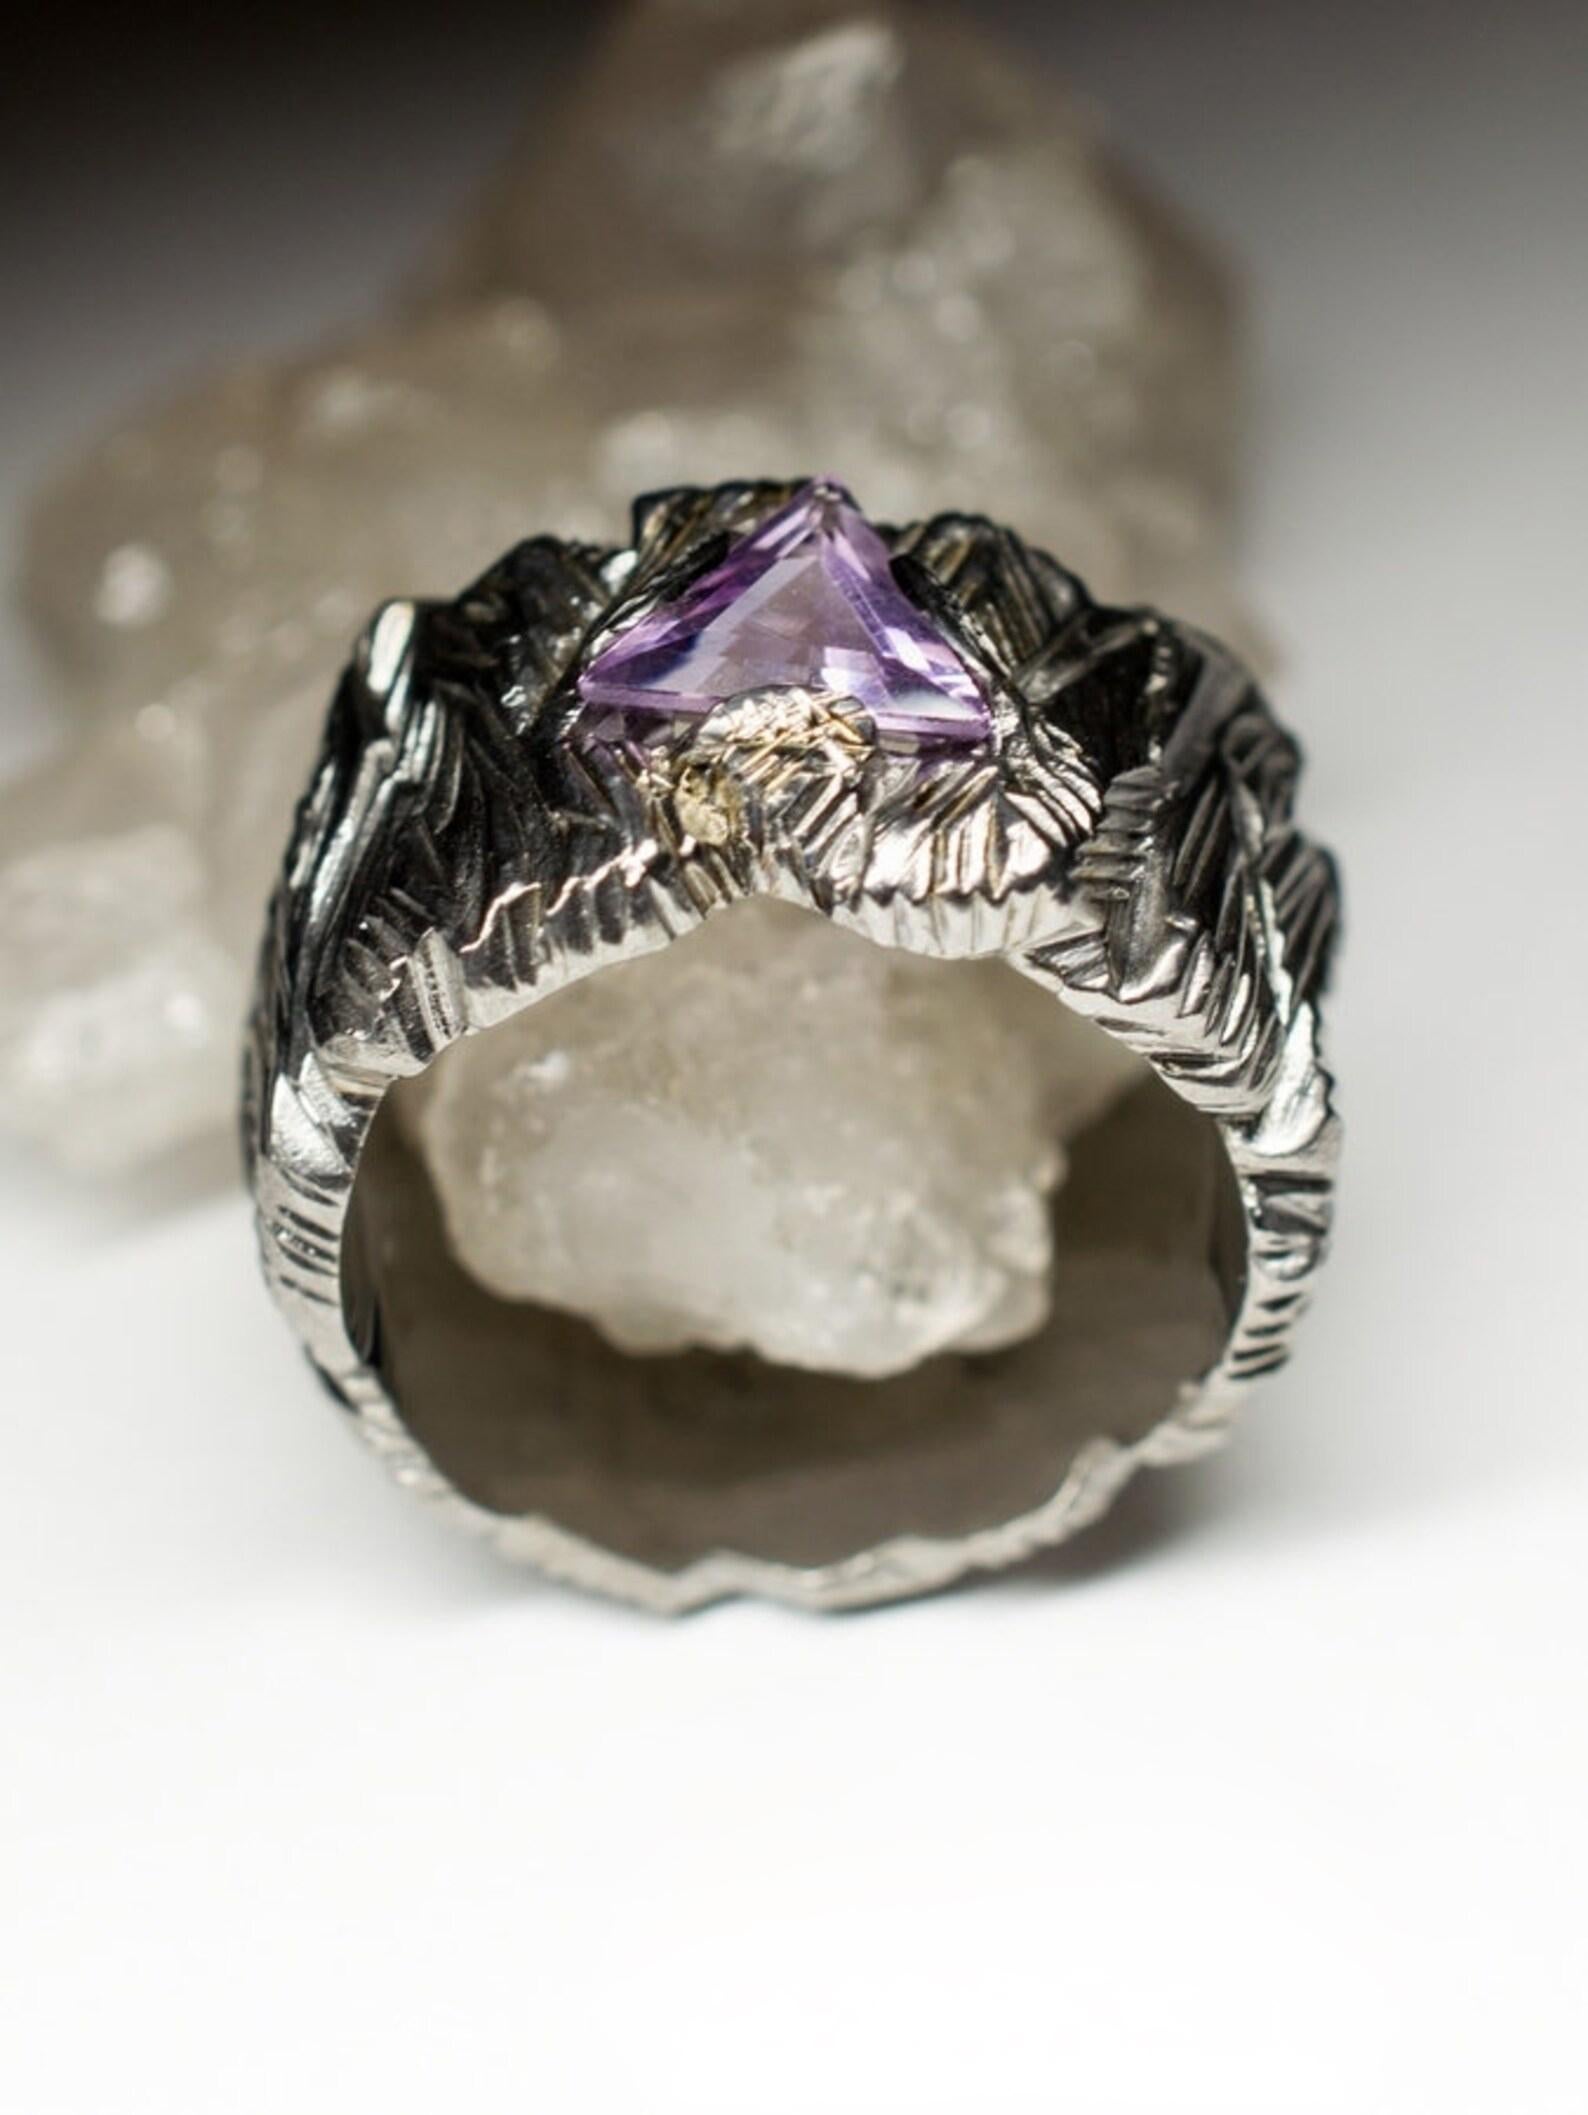 Big Amethyst Silver Ring Blackened Statement Jewels Natural Purple Violet Stone For Sale 2